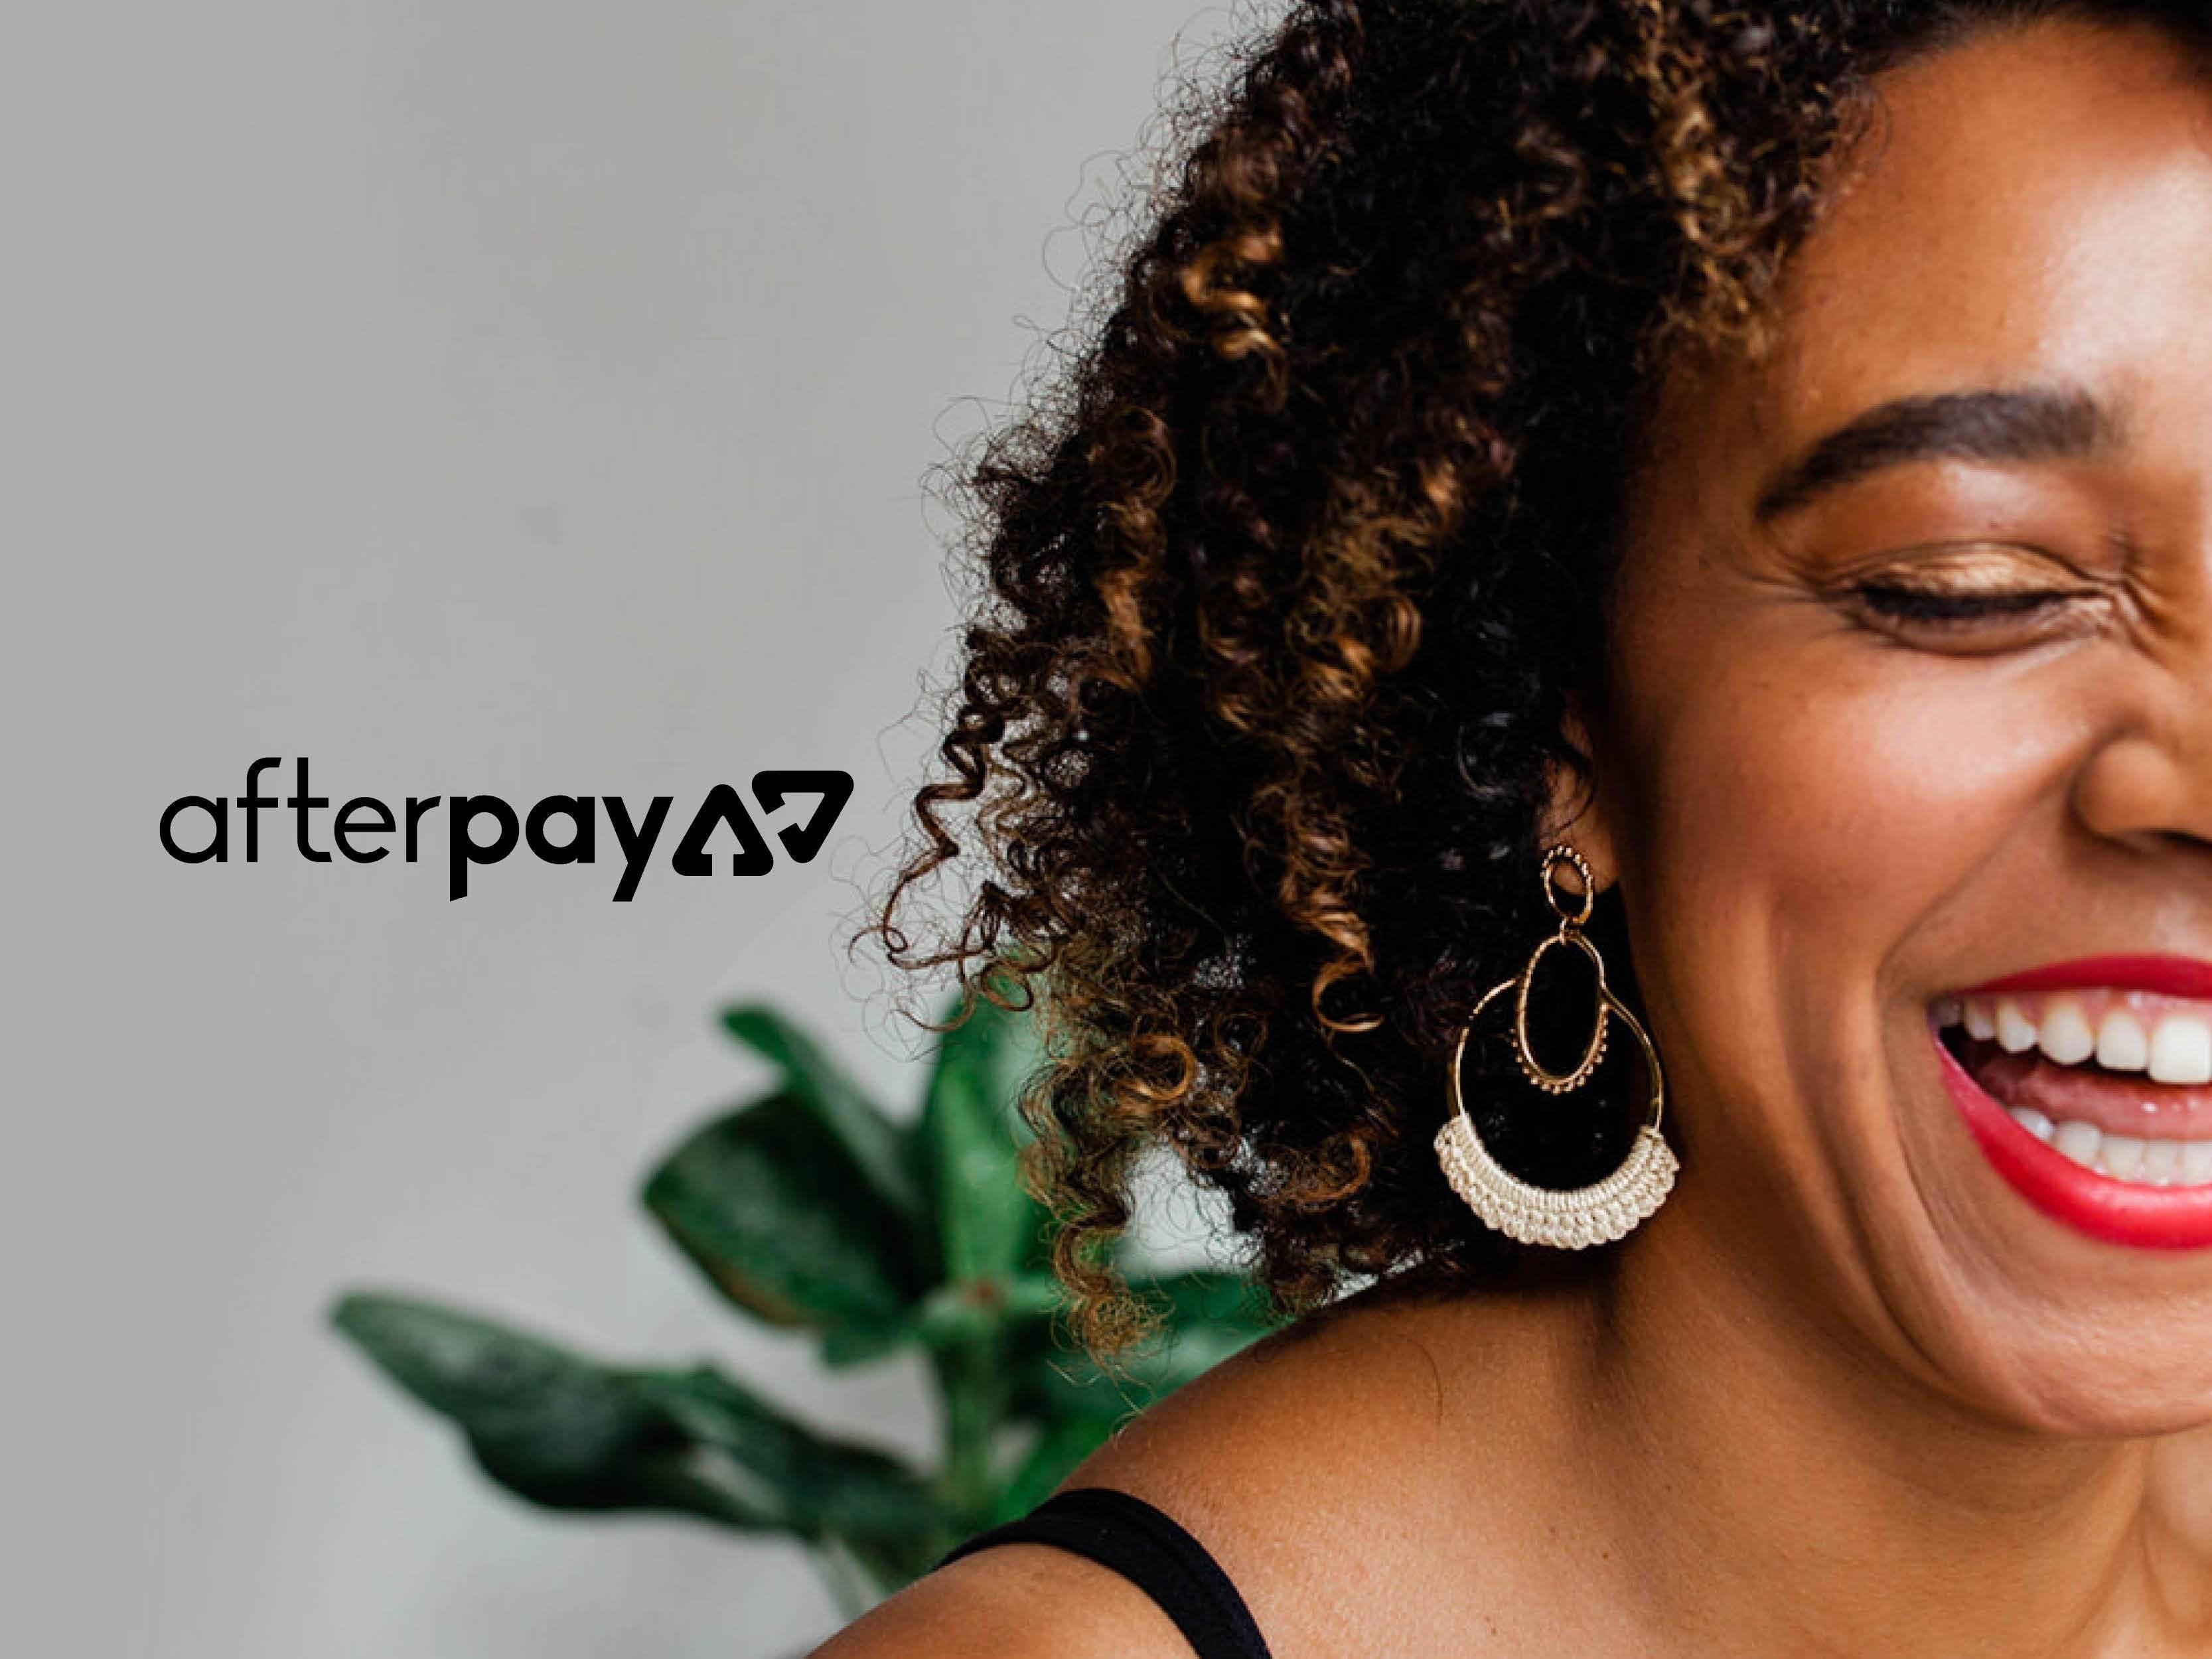 is excited to announce its partnership with Afterpay